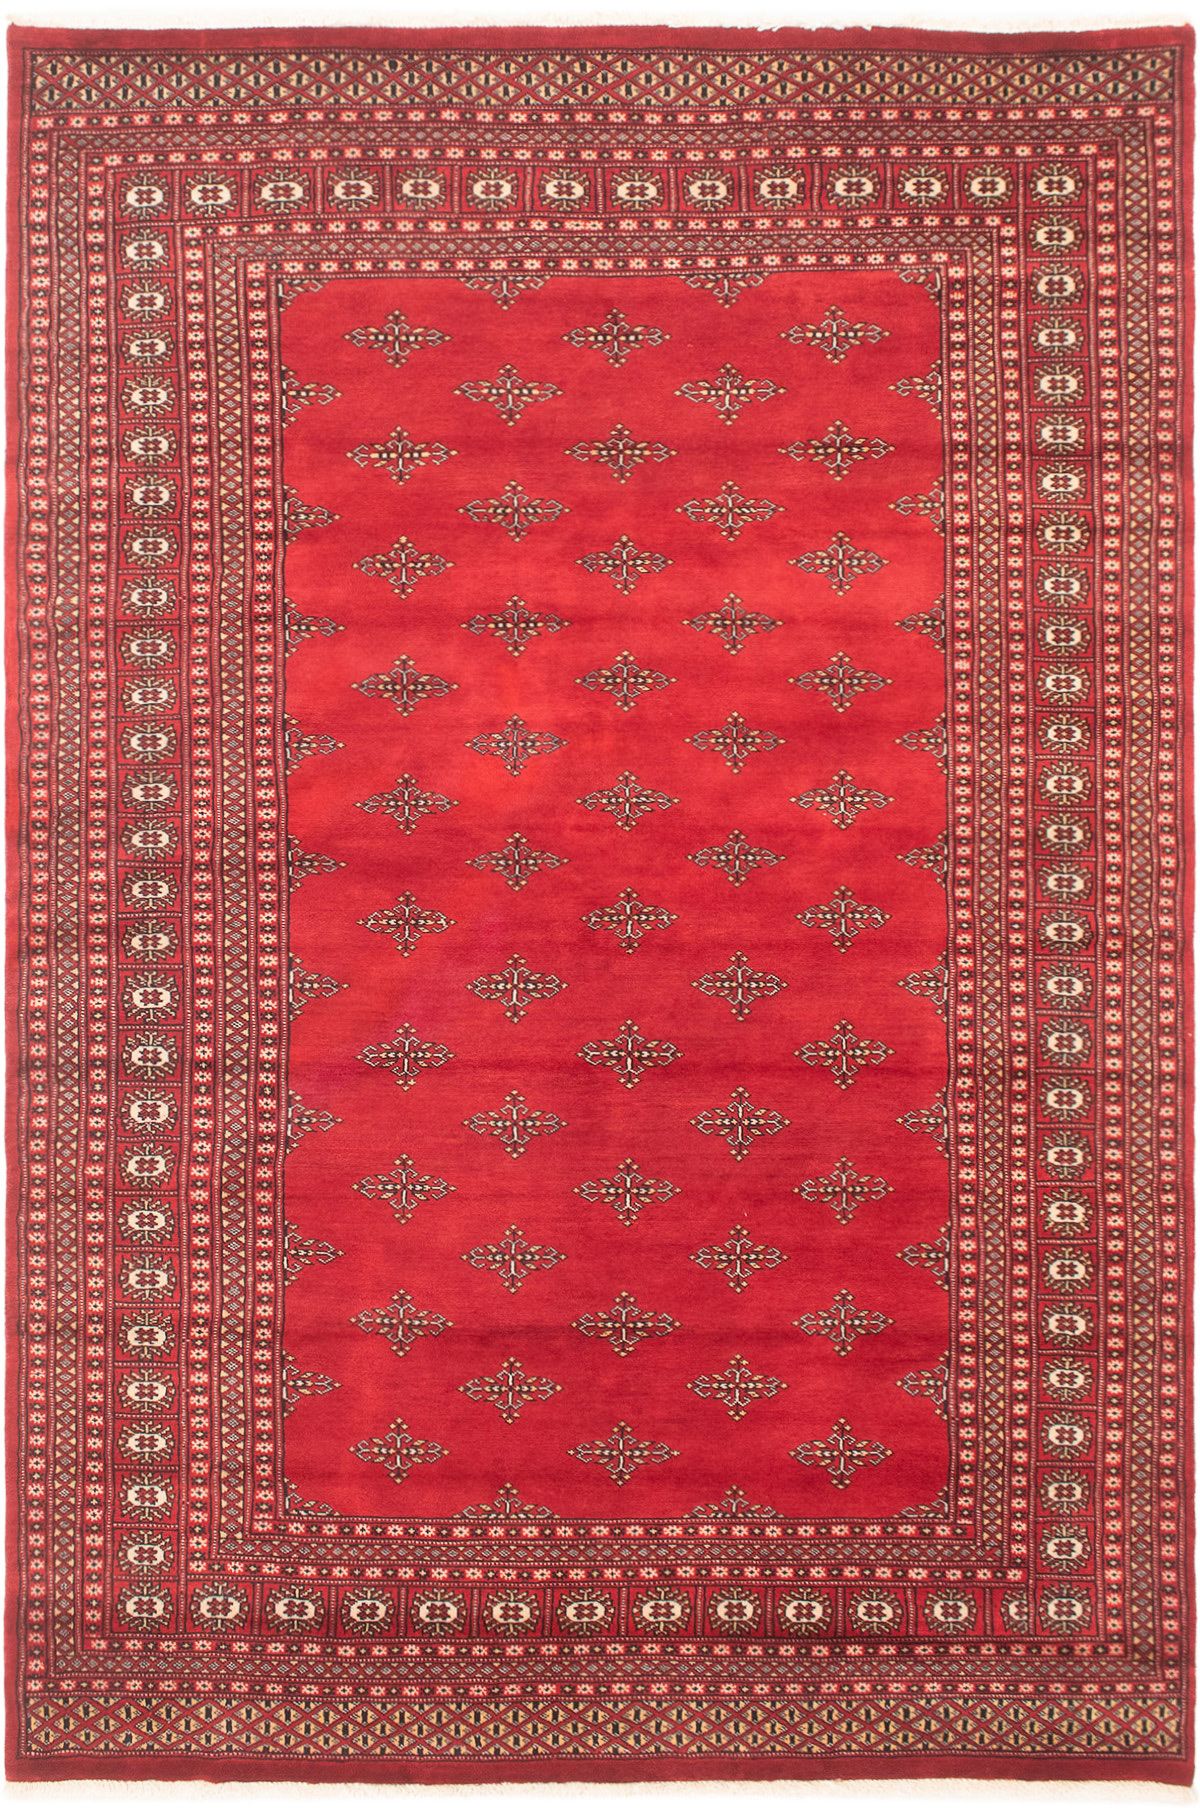 Hand-knotted Finest Peshawar Bokhara Red Wool Rug 6'0" x 8'10"  Size: 6'0" x 8'10"  